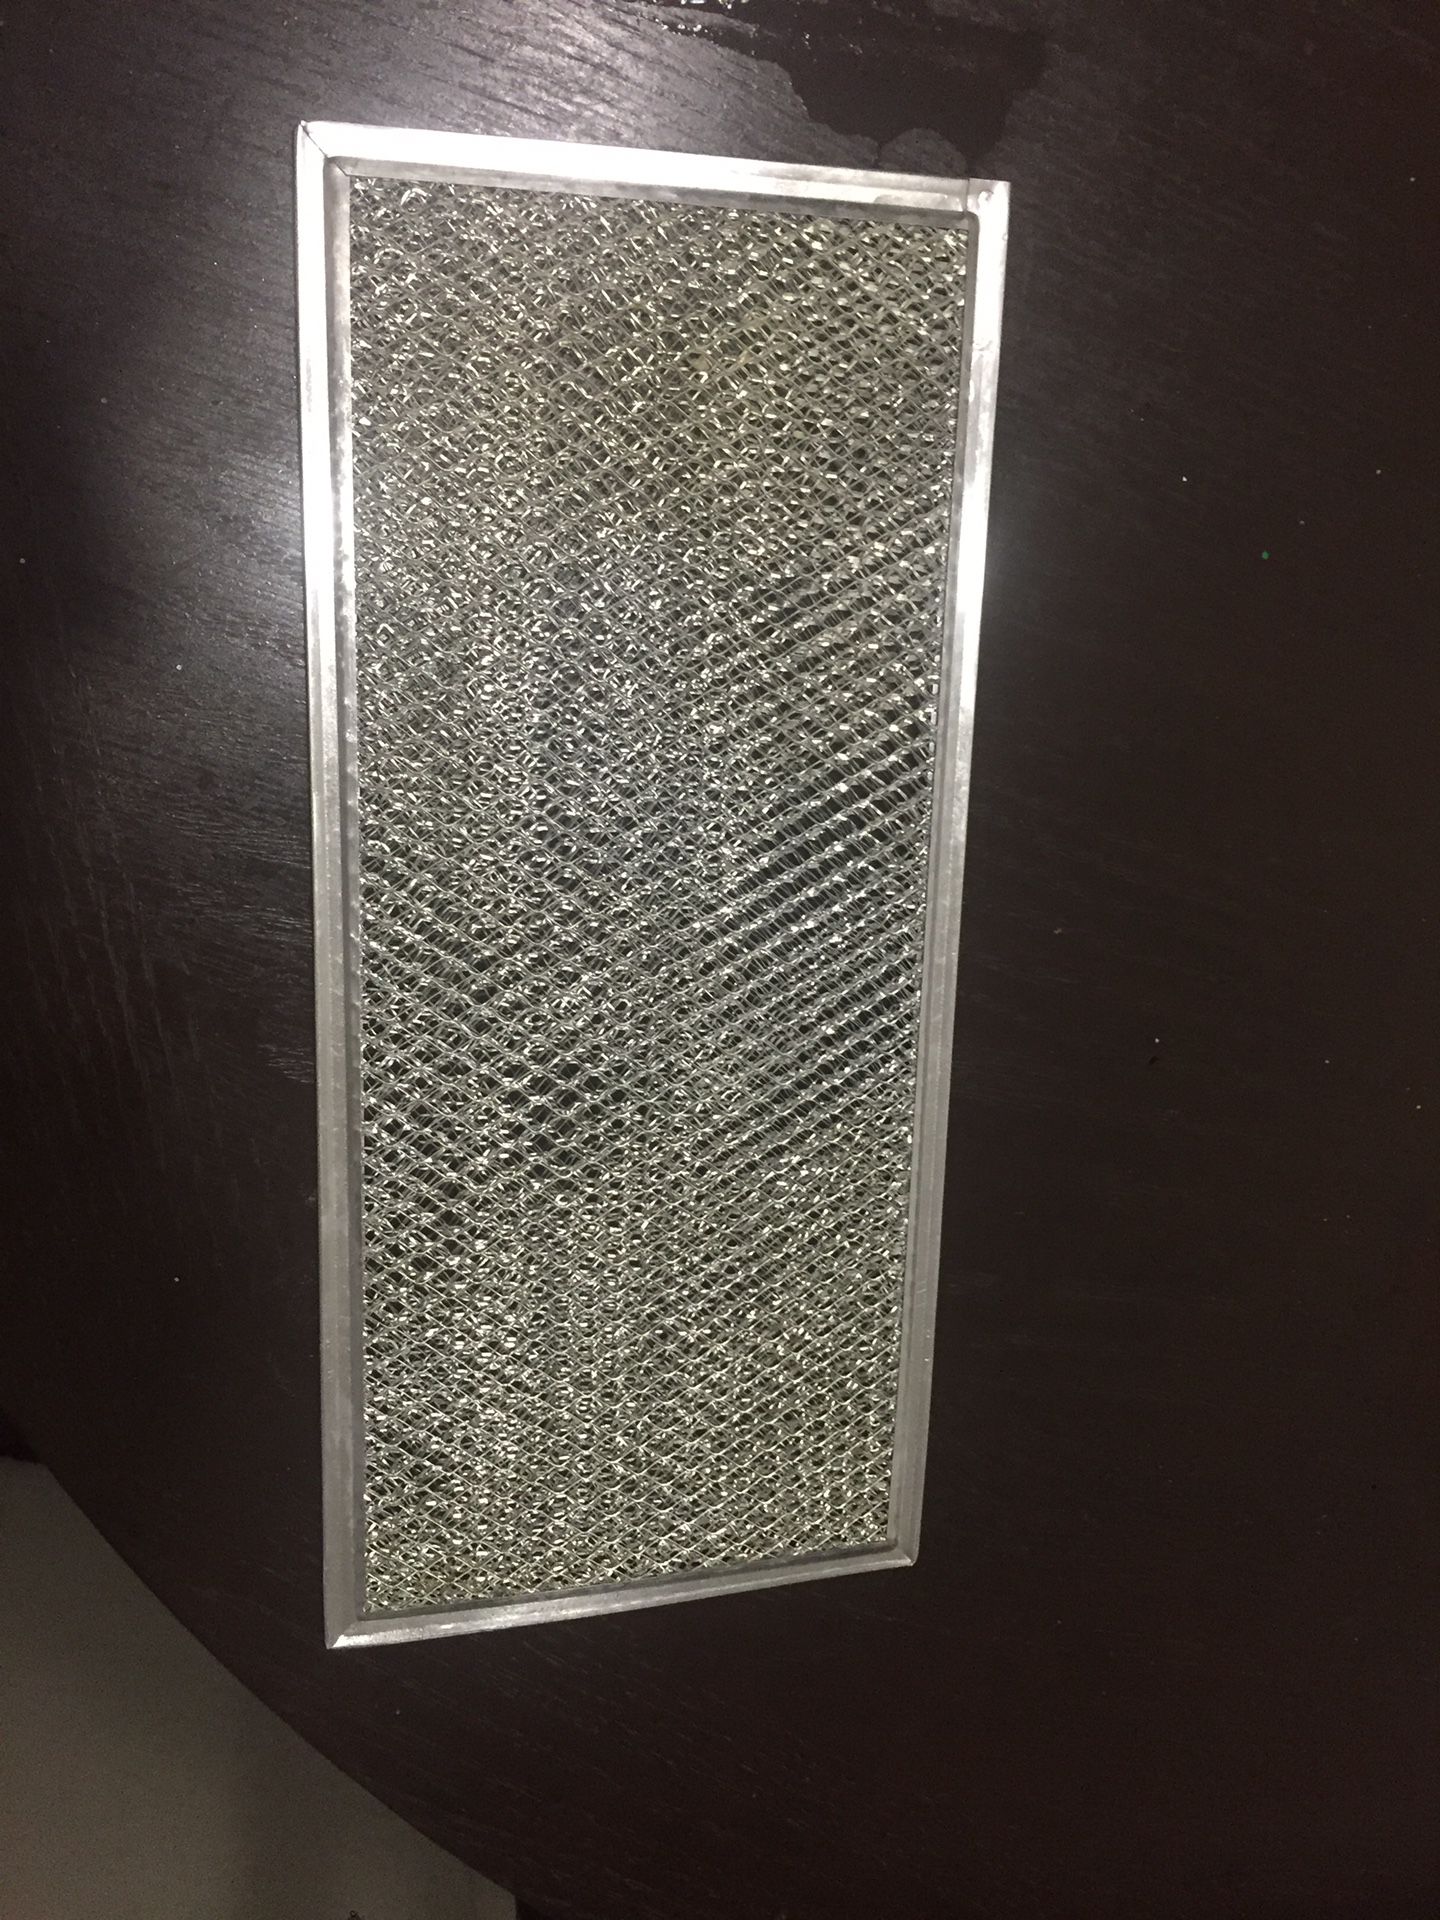 Microwave grill filter